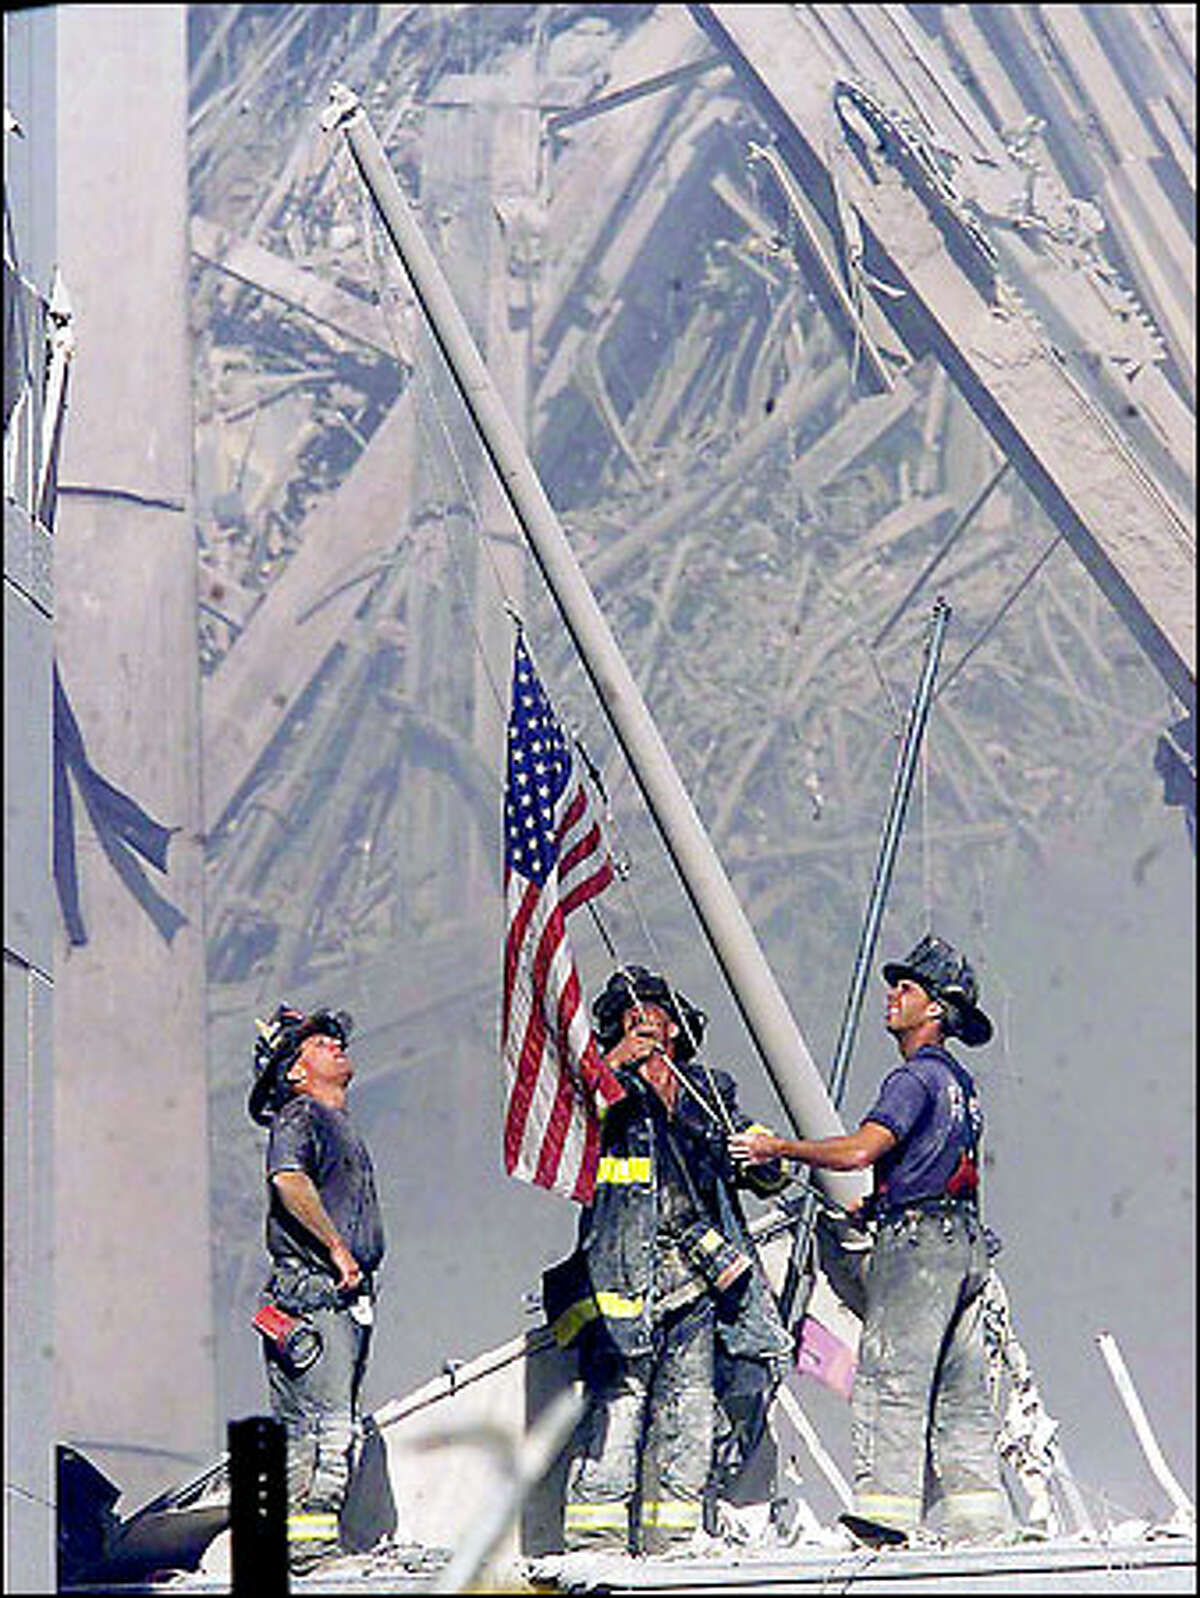 September 11: Brooklyn firefighters George Johnson, left, of Ladder 157, Dan McWilliams, center, of Ladder 157, and Billy Eisengrein, of Rescue 2, raise a flag at the World Trade Center in New York.